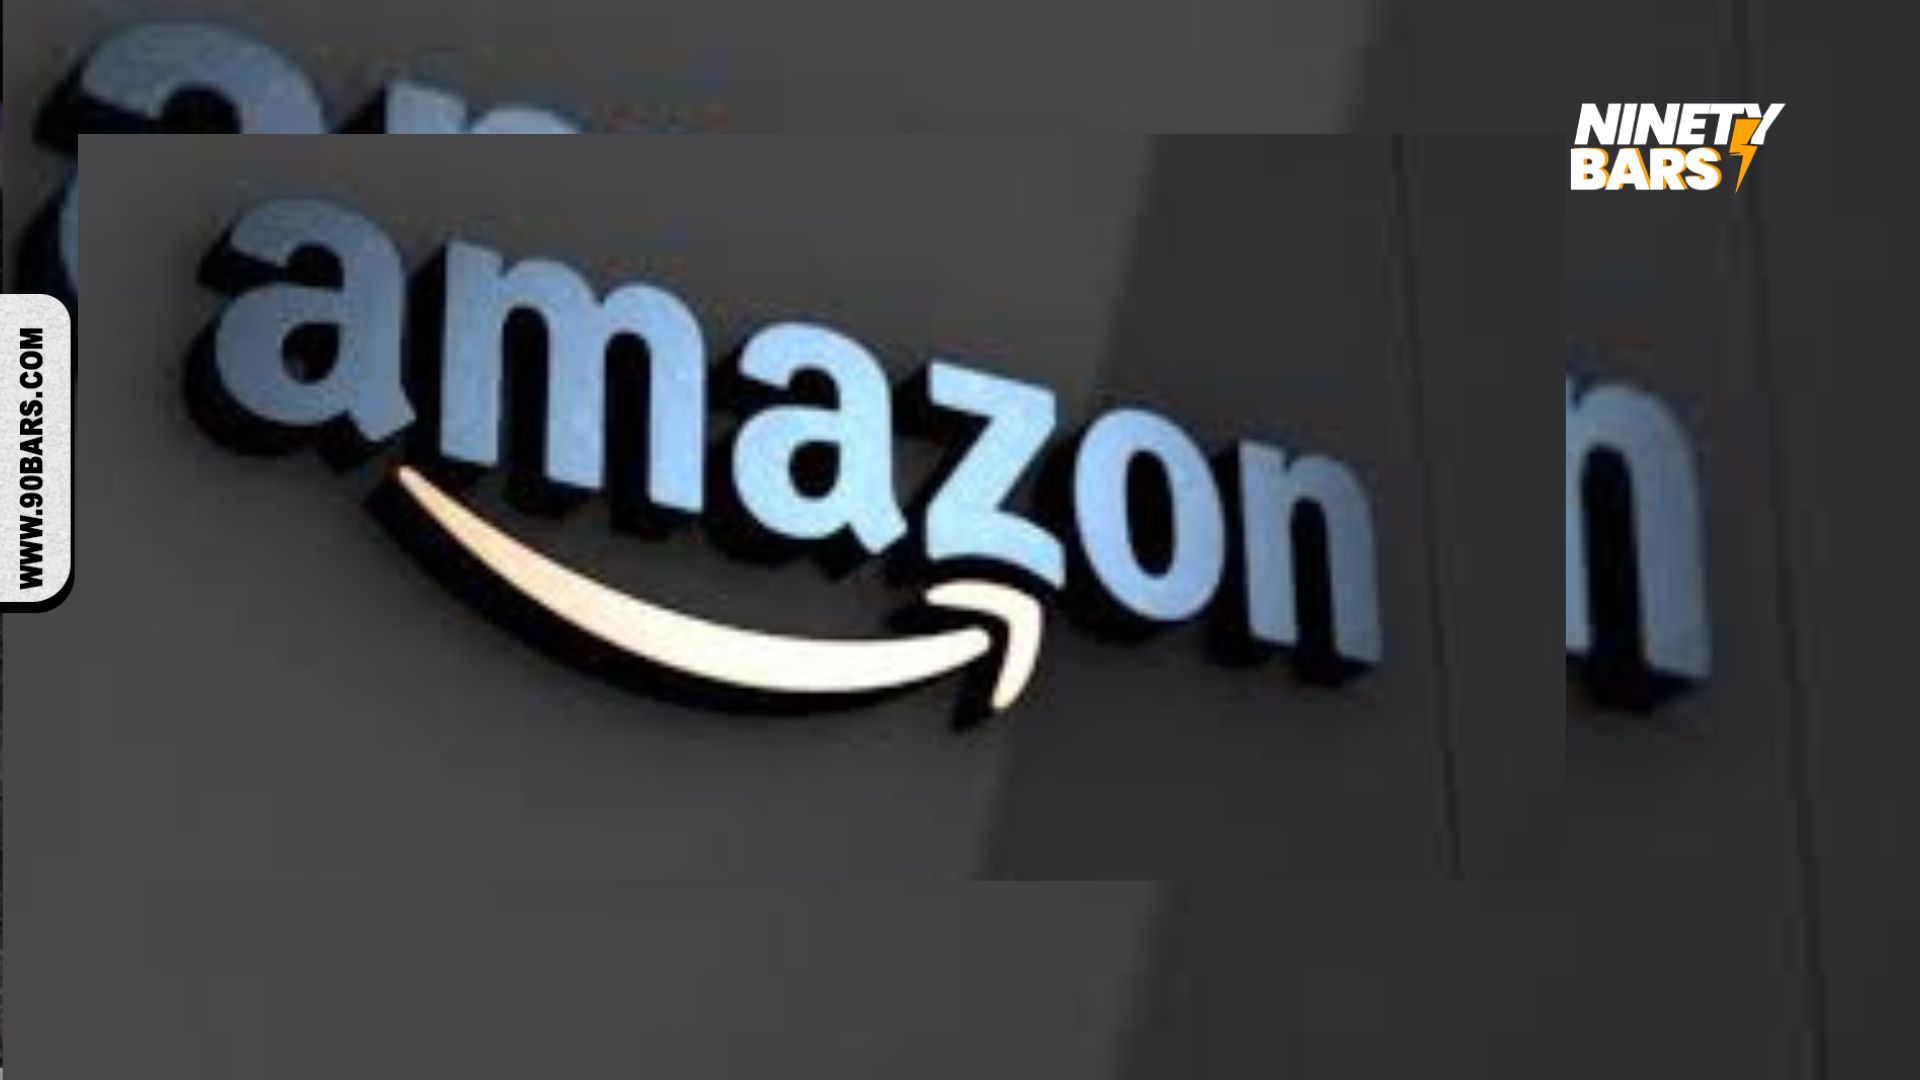 Amazon was penalized for "excessive" worker surveillance.